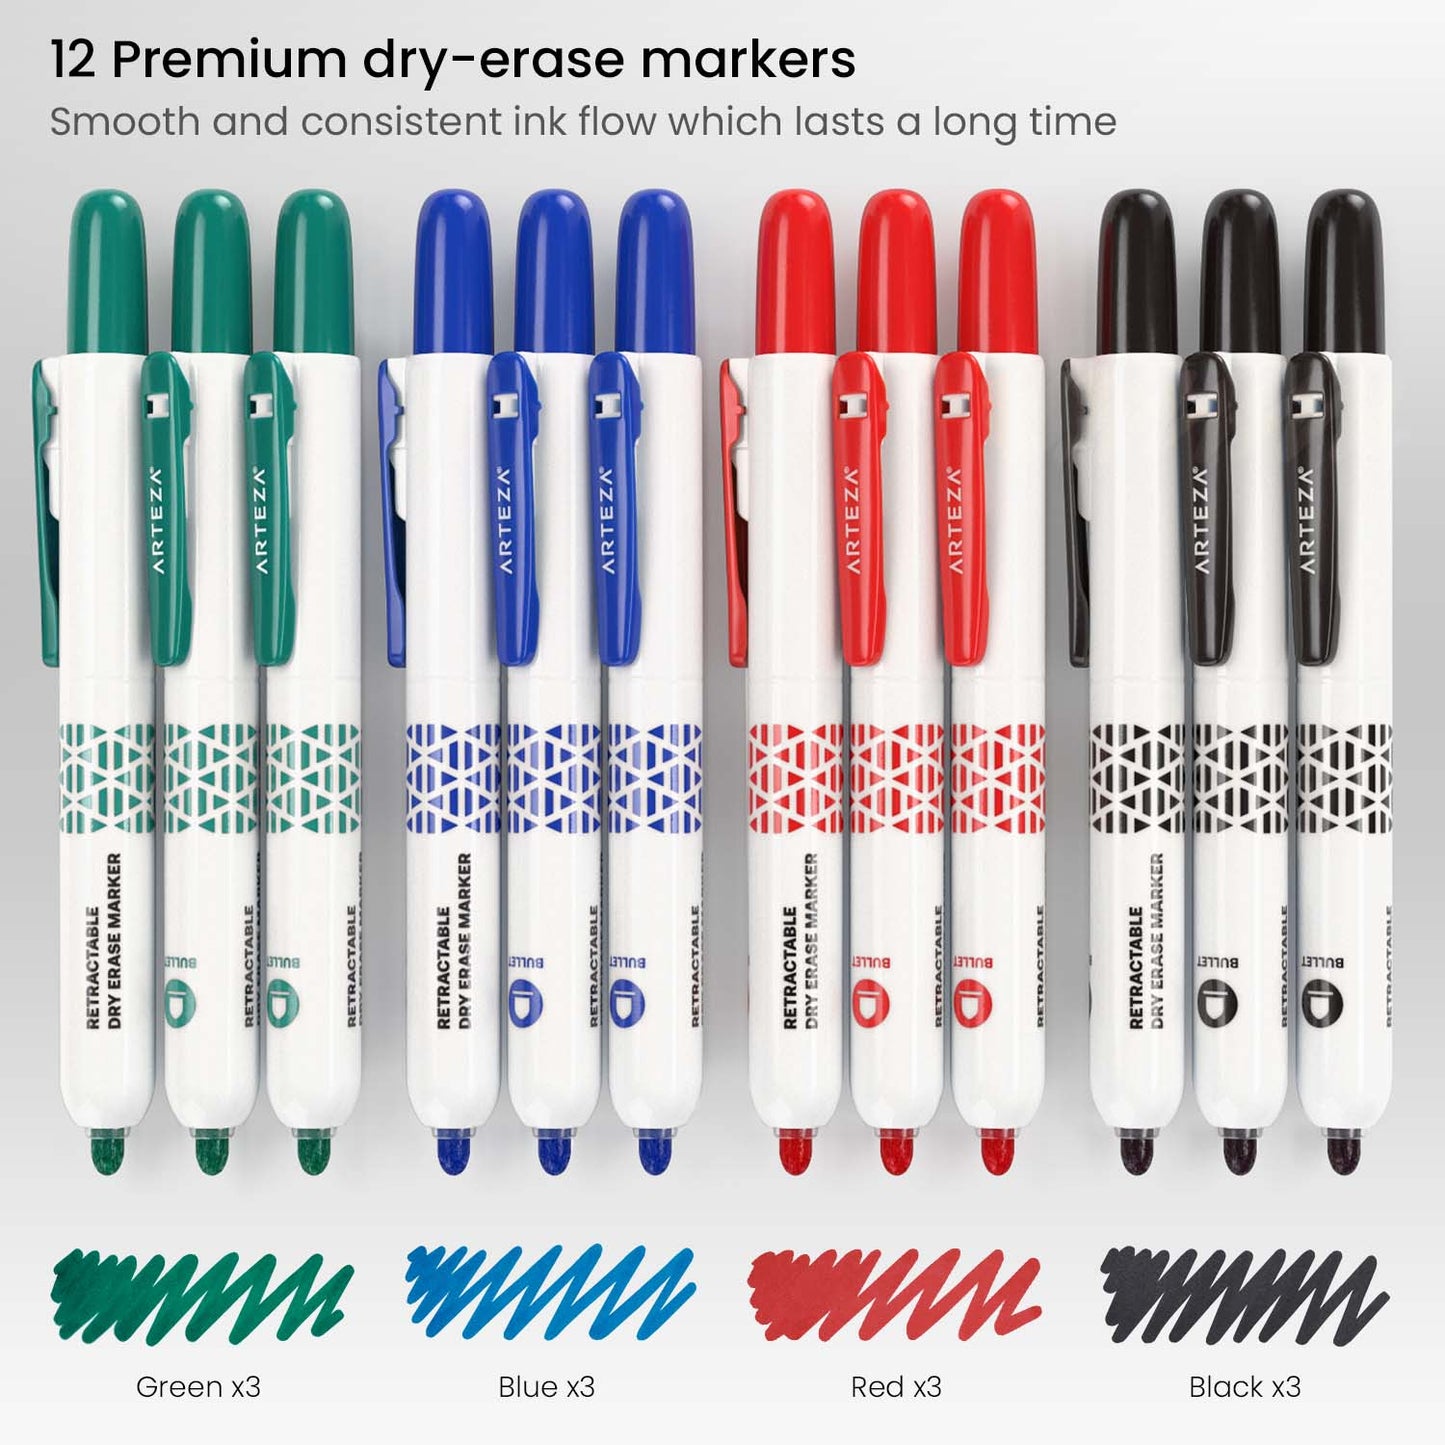 Jumbo Retractable Dry Erase Markers, Assorted Colors - Set of 12